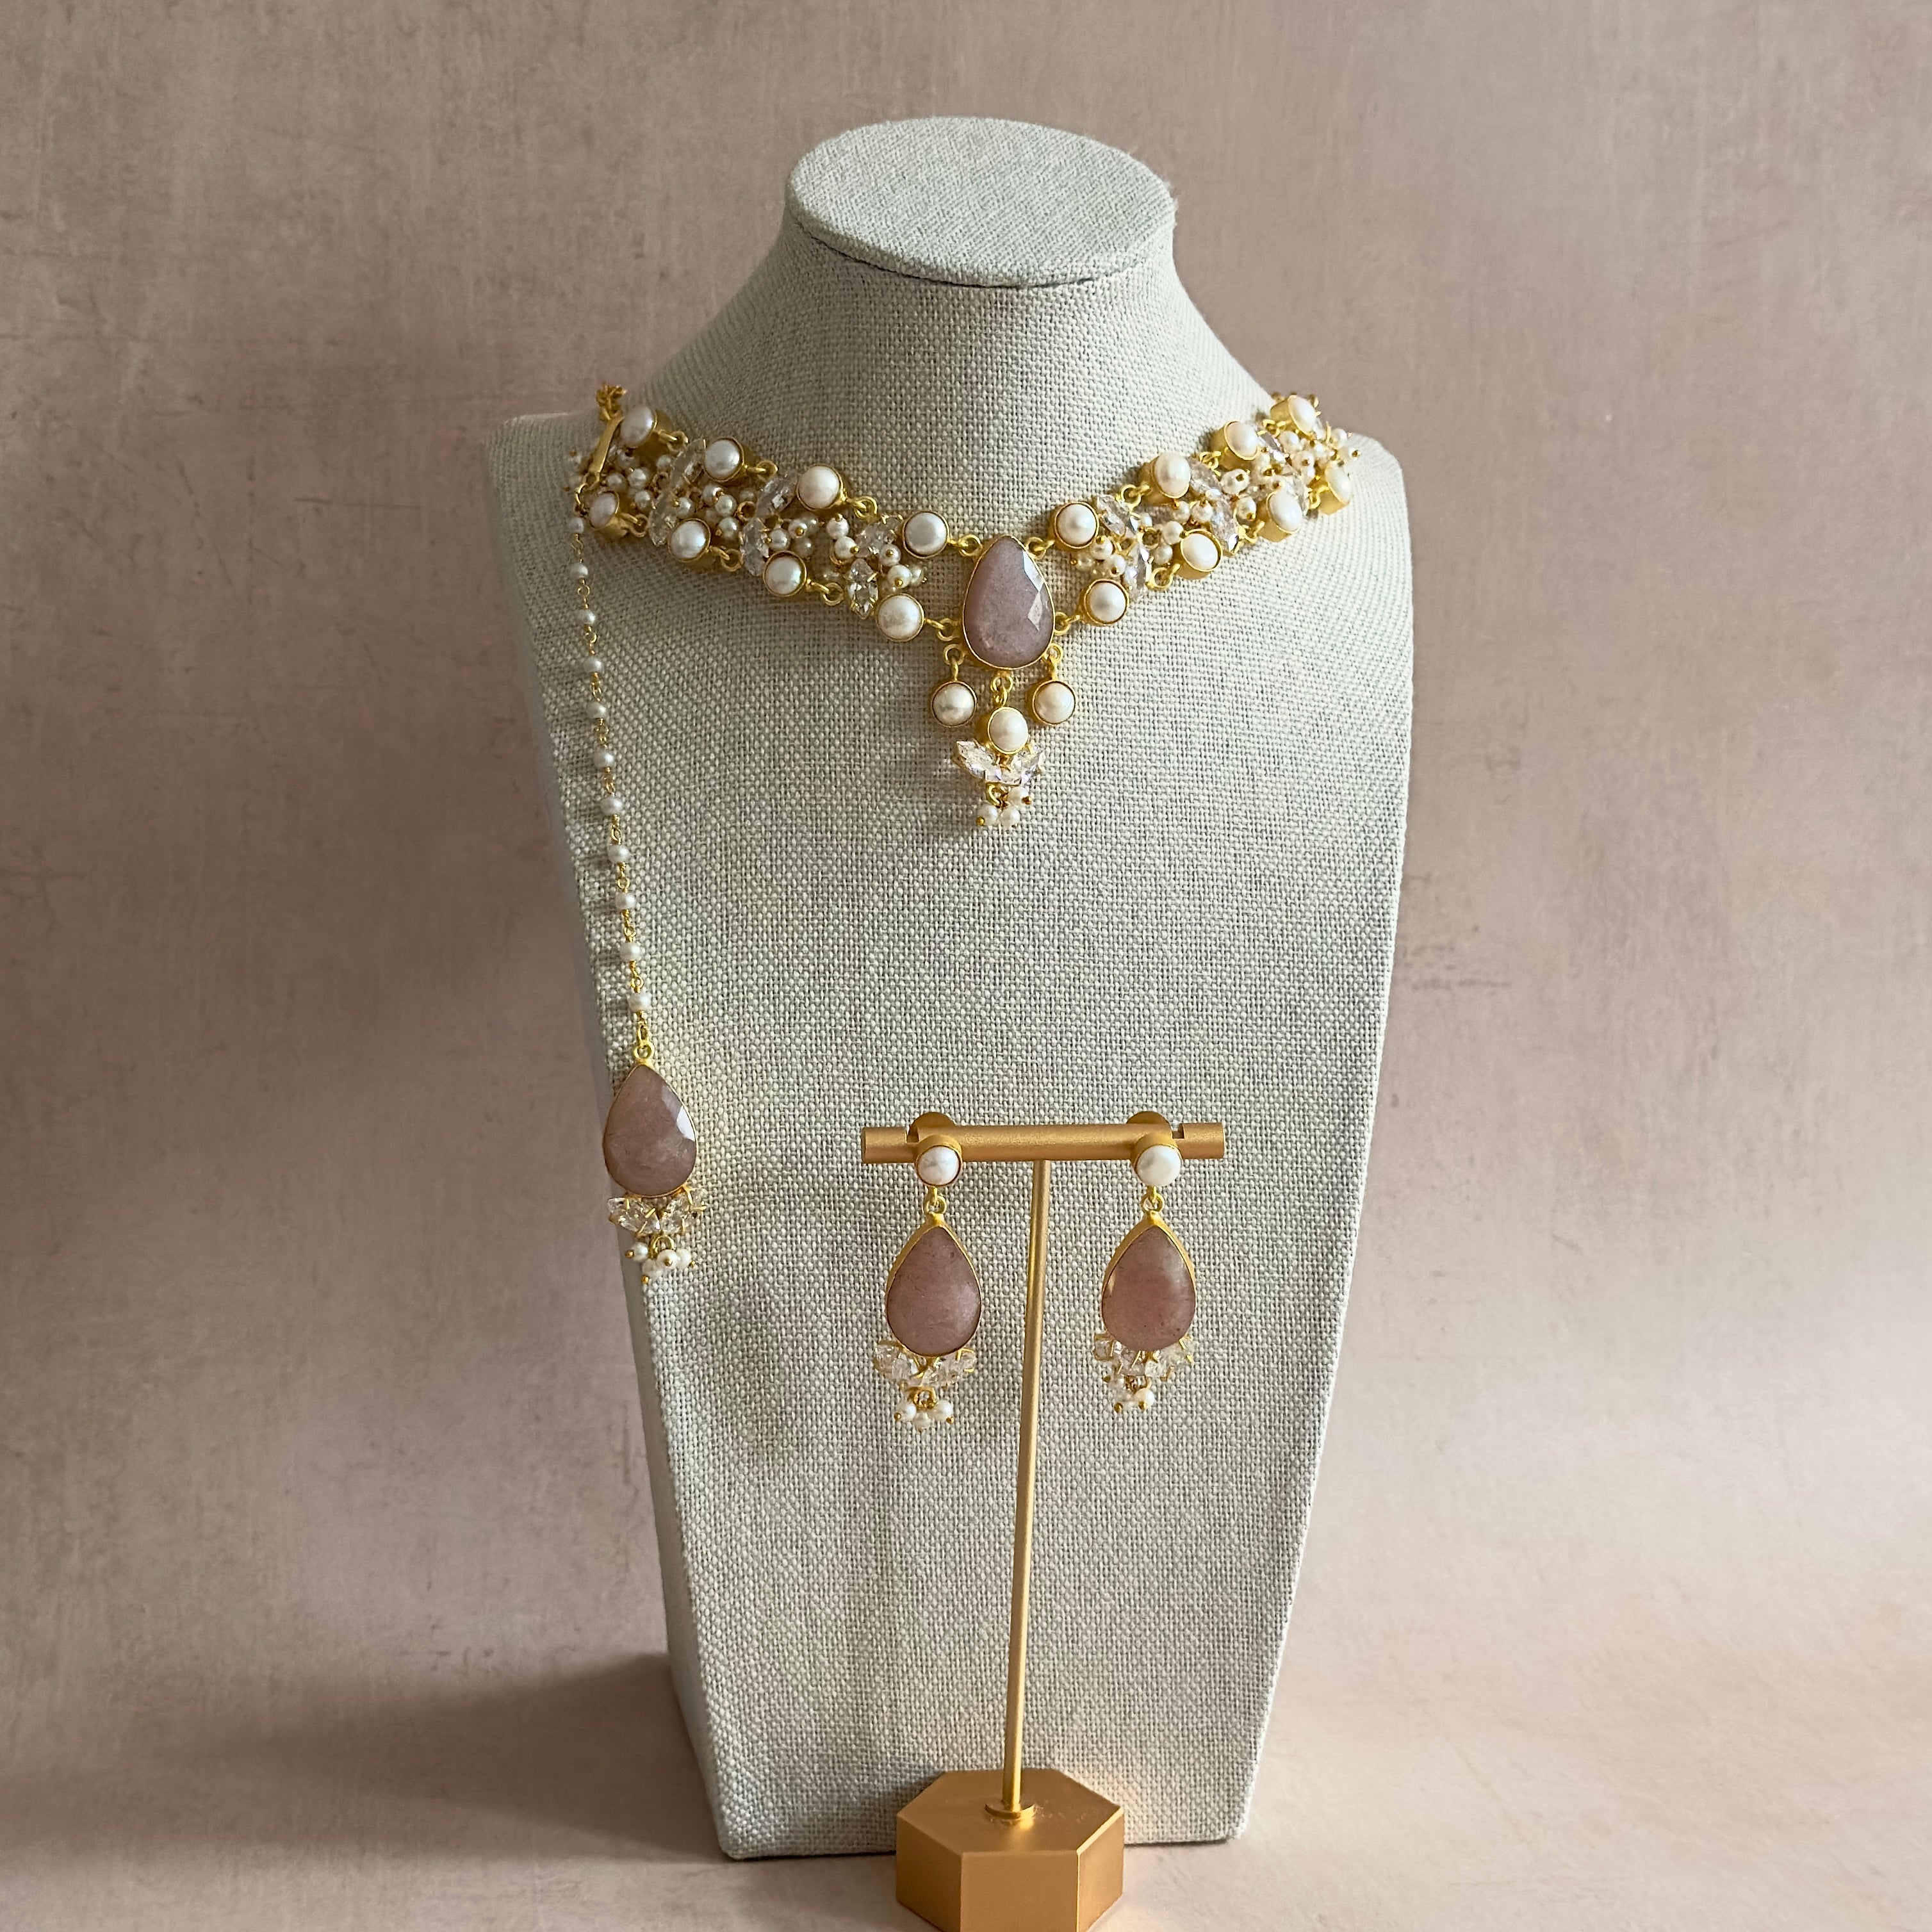 Unleash your inner glamour with our Ari Mink Pearl Choker Set. The gorgeous mink and pearl tones complement each other perfectly, while the cubic zirconia adds a touch of sparkle. The adjustable chain ensures a perfect fit, complete with matching earrings and tikka for a stunning look. Elevate your style and be the center of attention with this exquisite set!